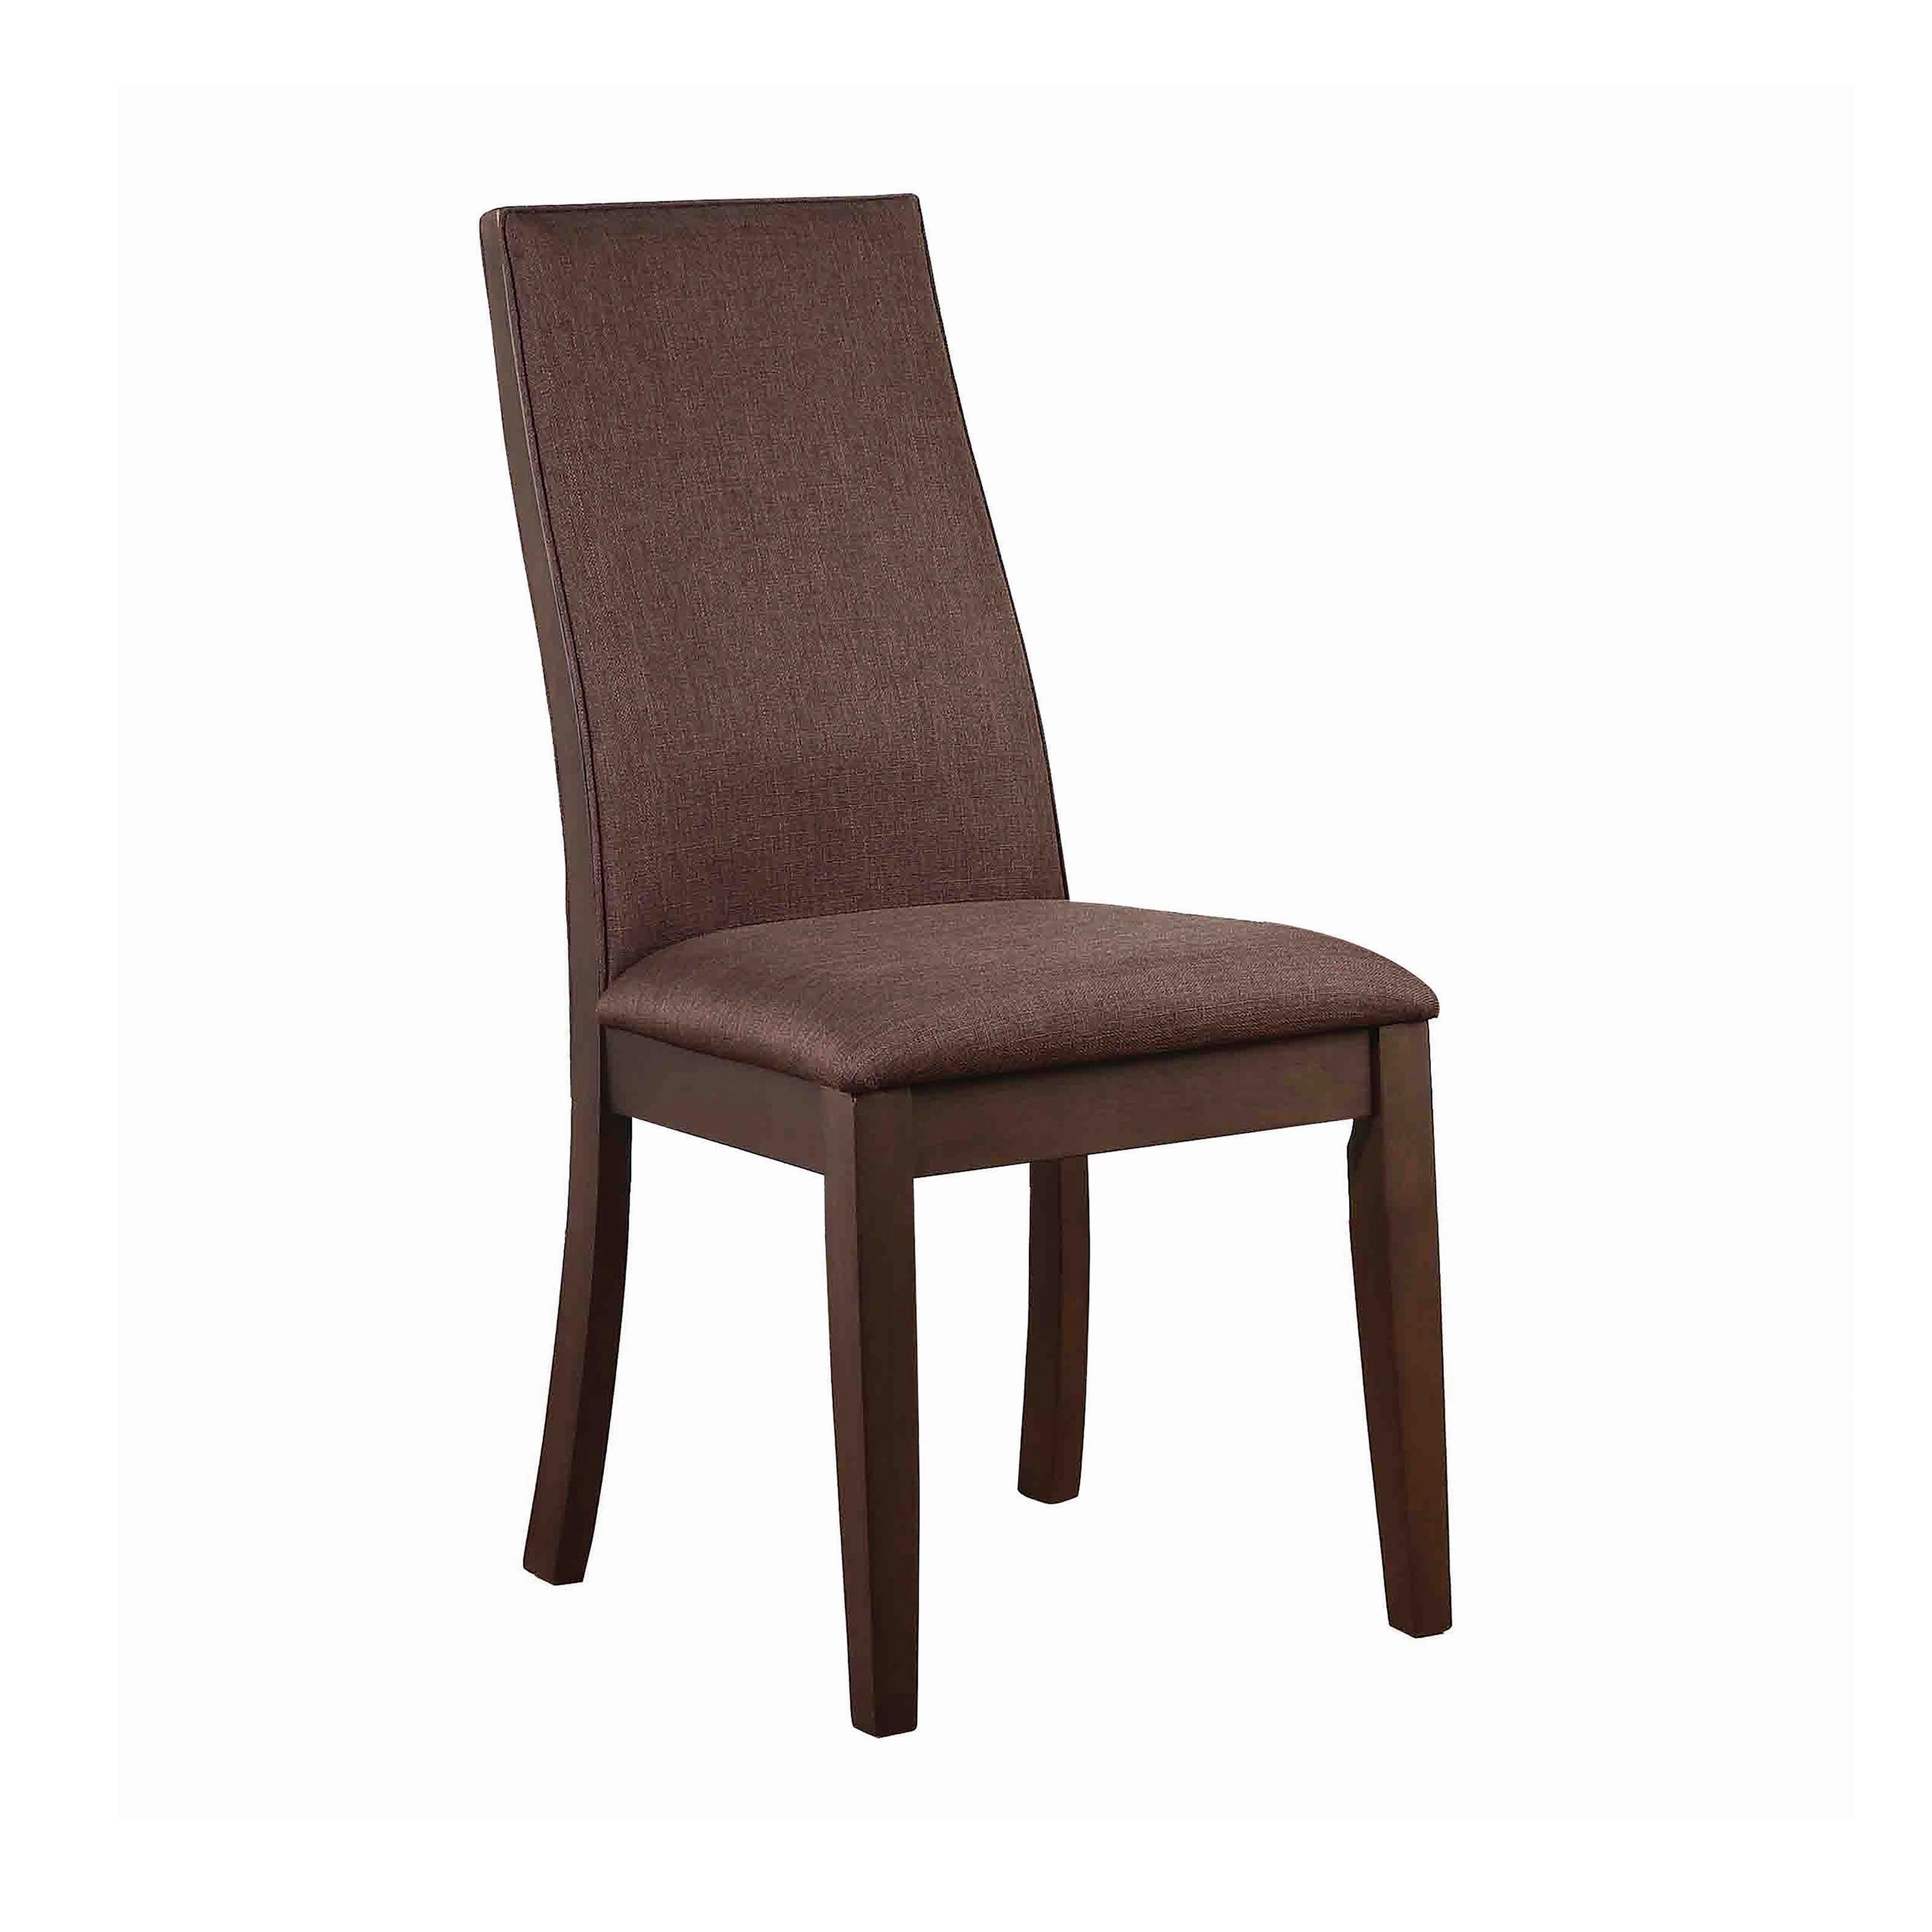 Transitional Side Chair Set 106582 Spring Creek 106582 in Brown Fabric